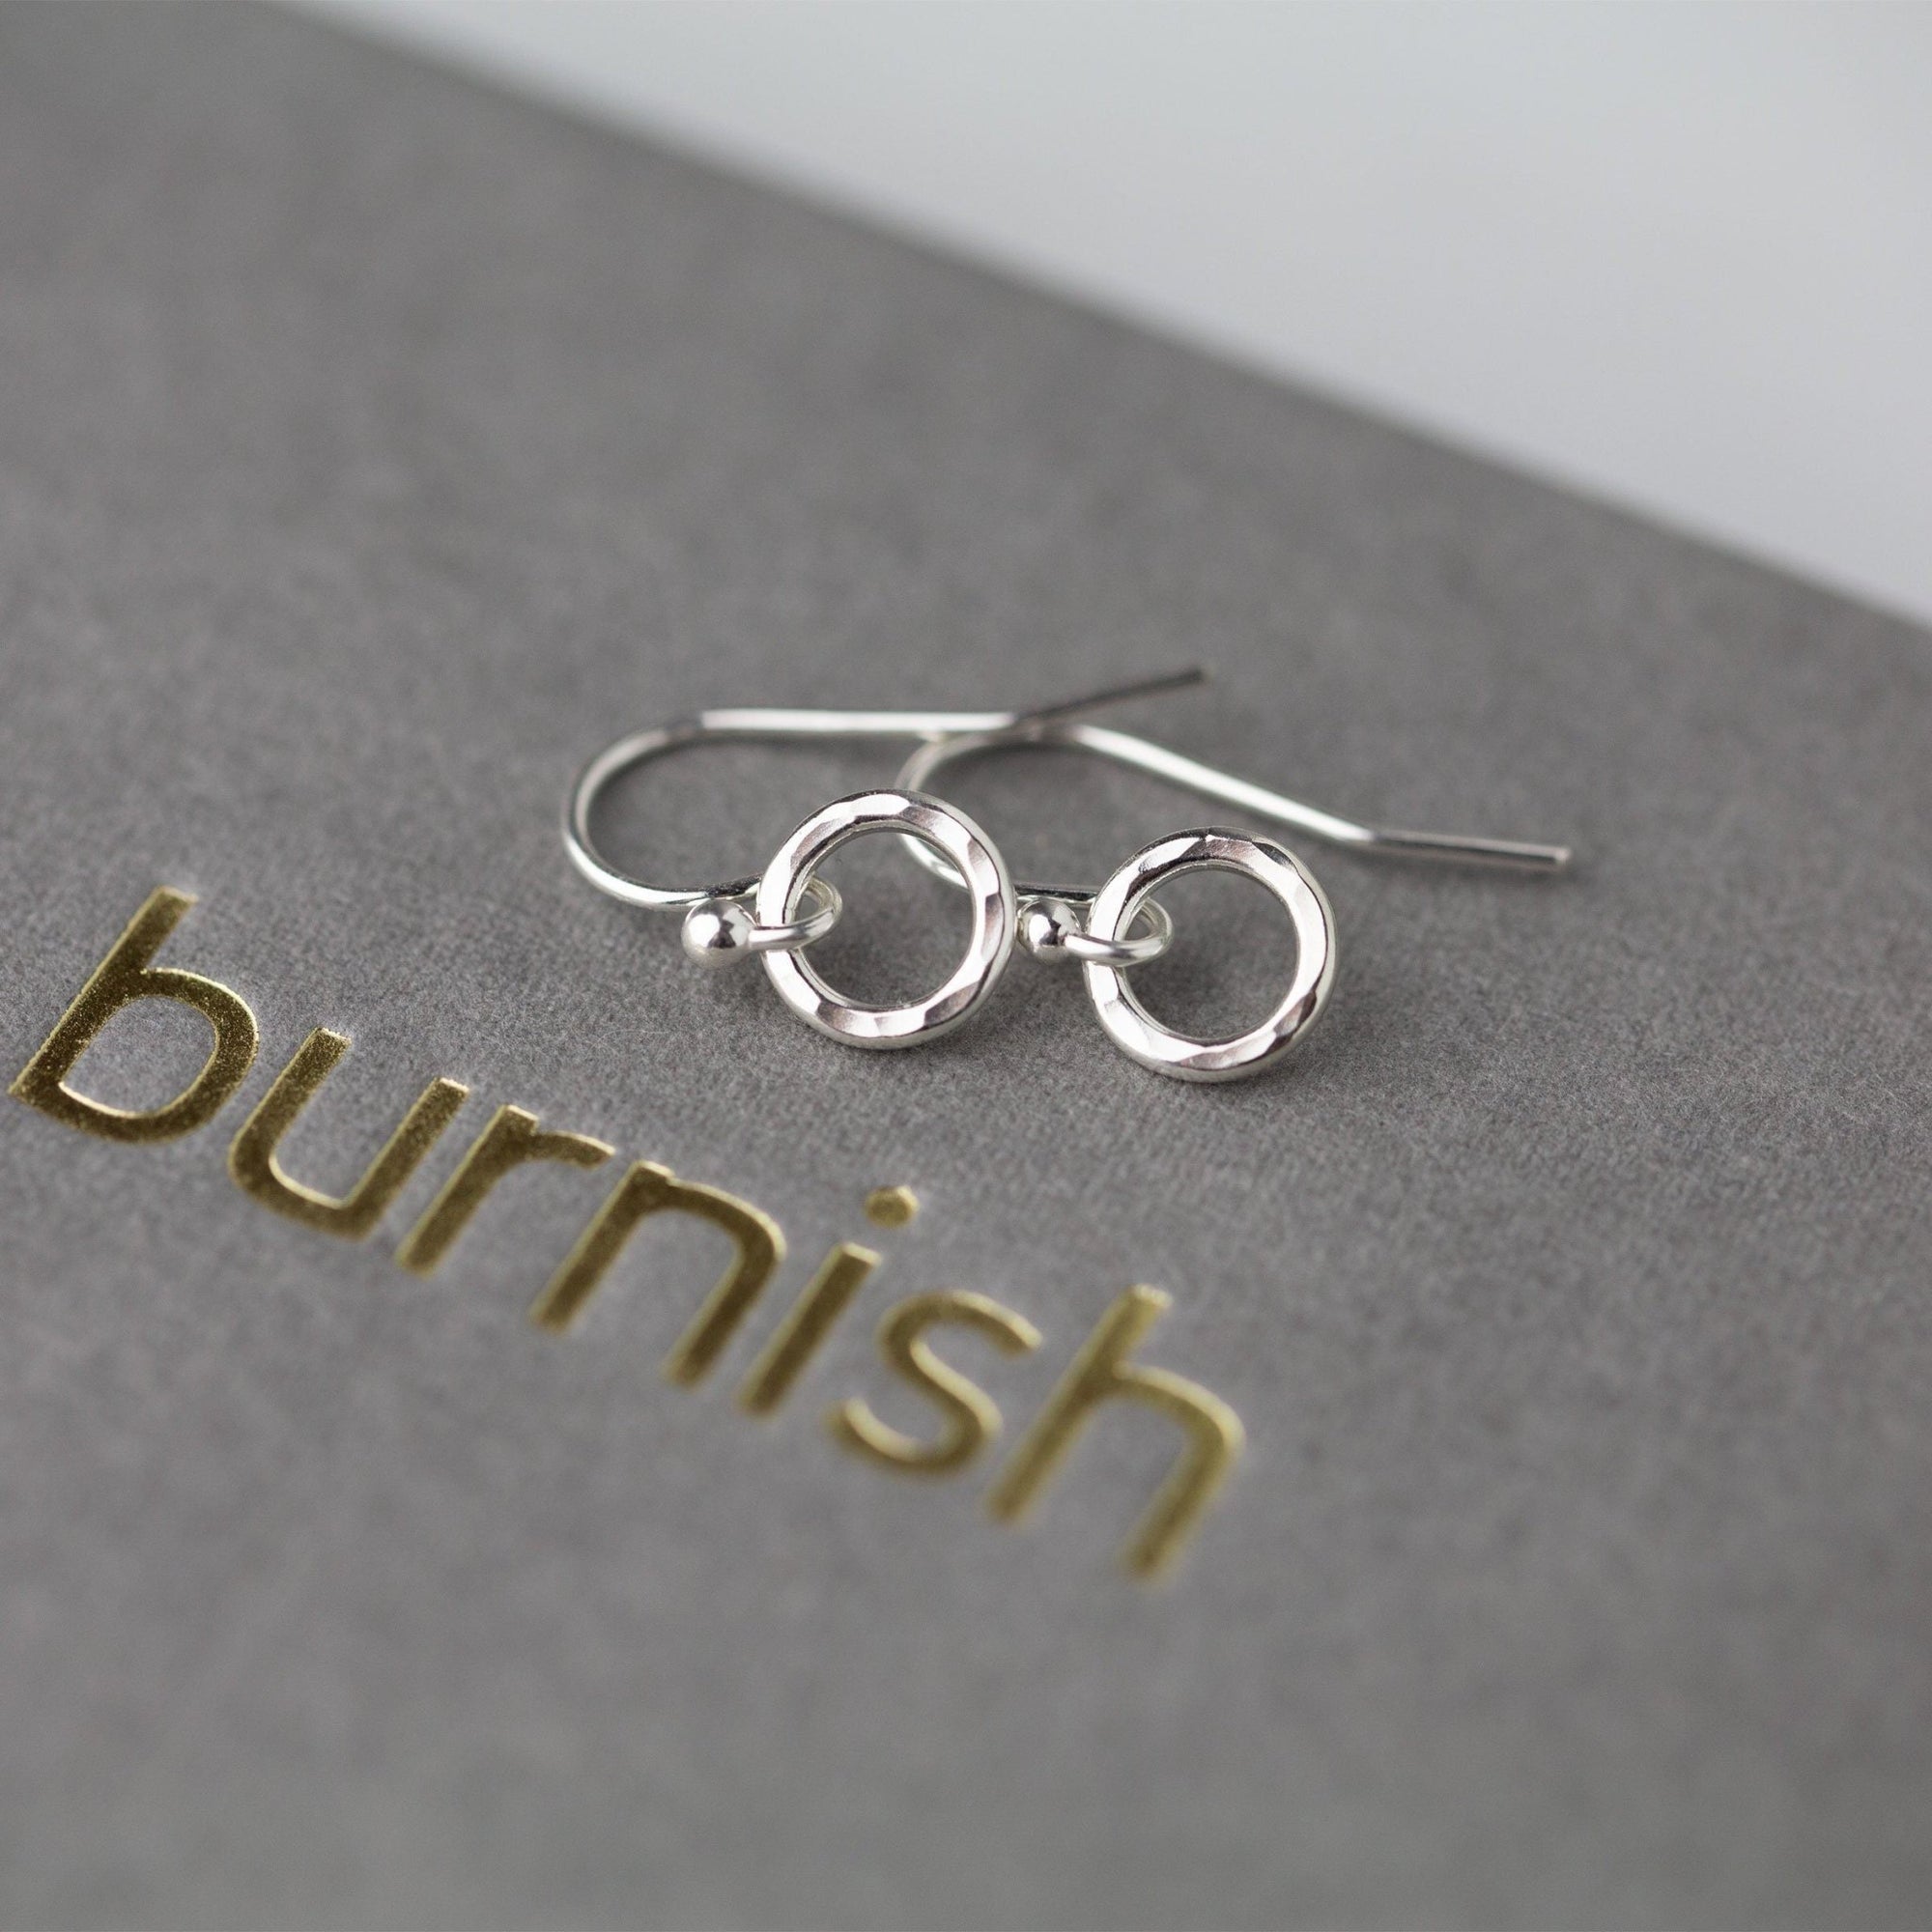 Tiny Circle Earrings - Sterling Silver - Handmade Jewelry by Burnish